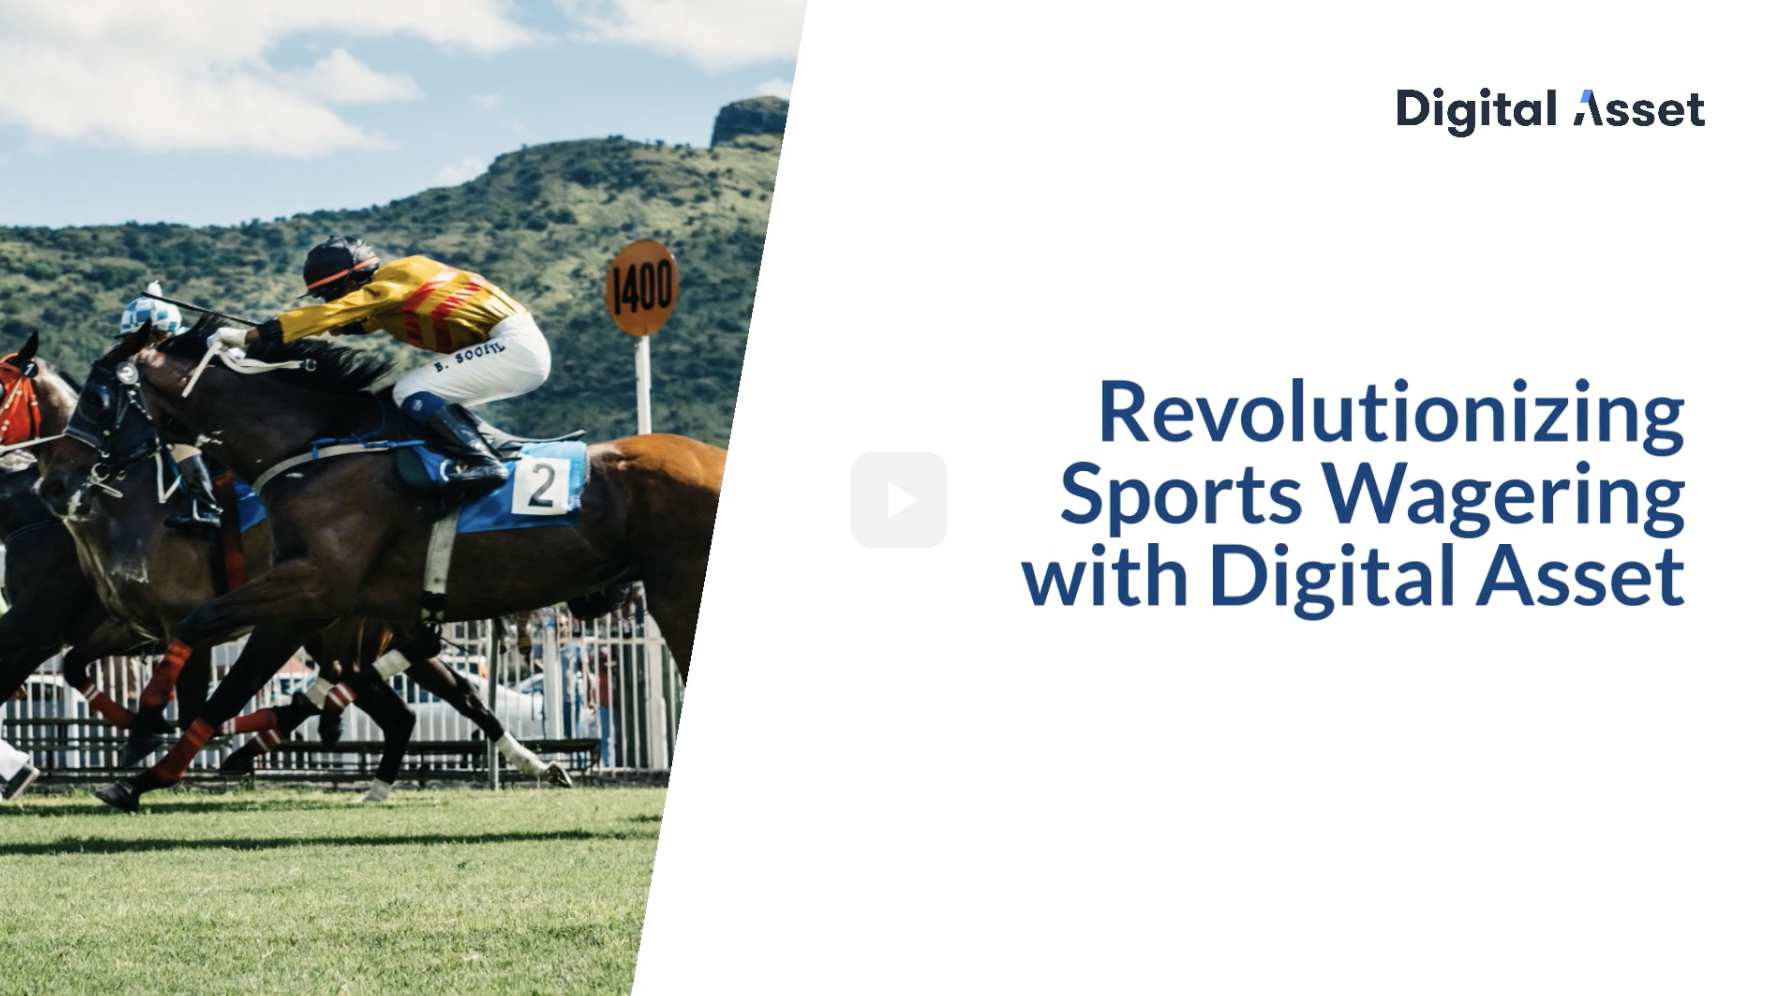 Revolutionizing Sports Wagering with Digital Asset